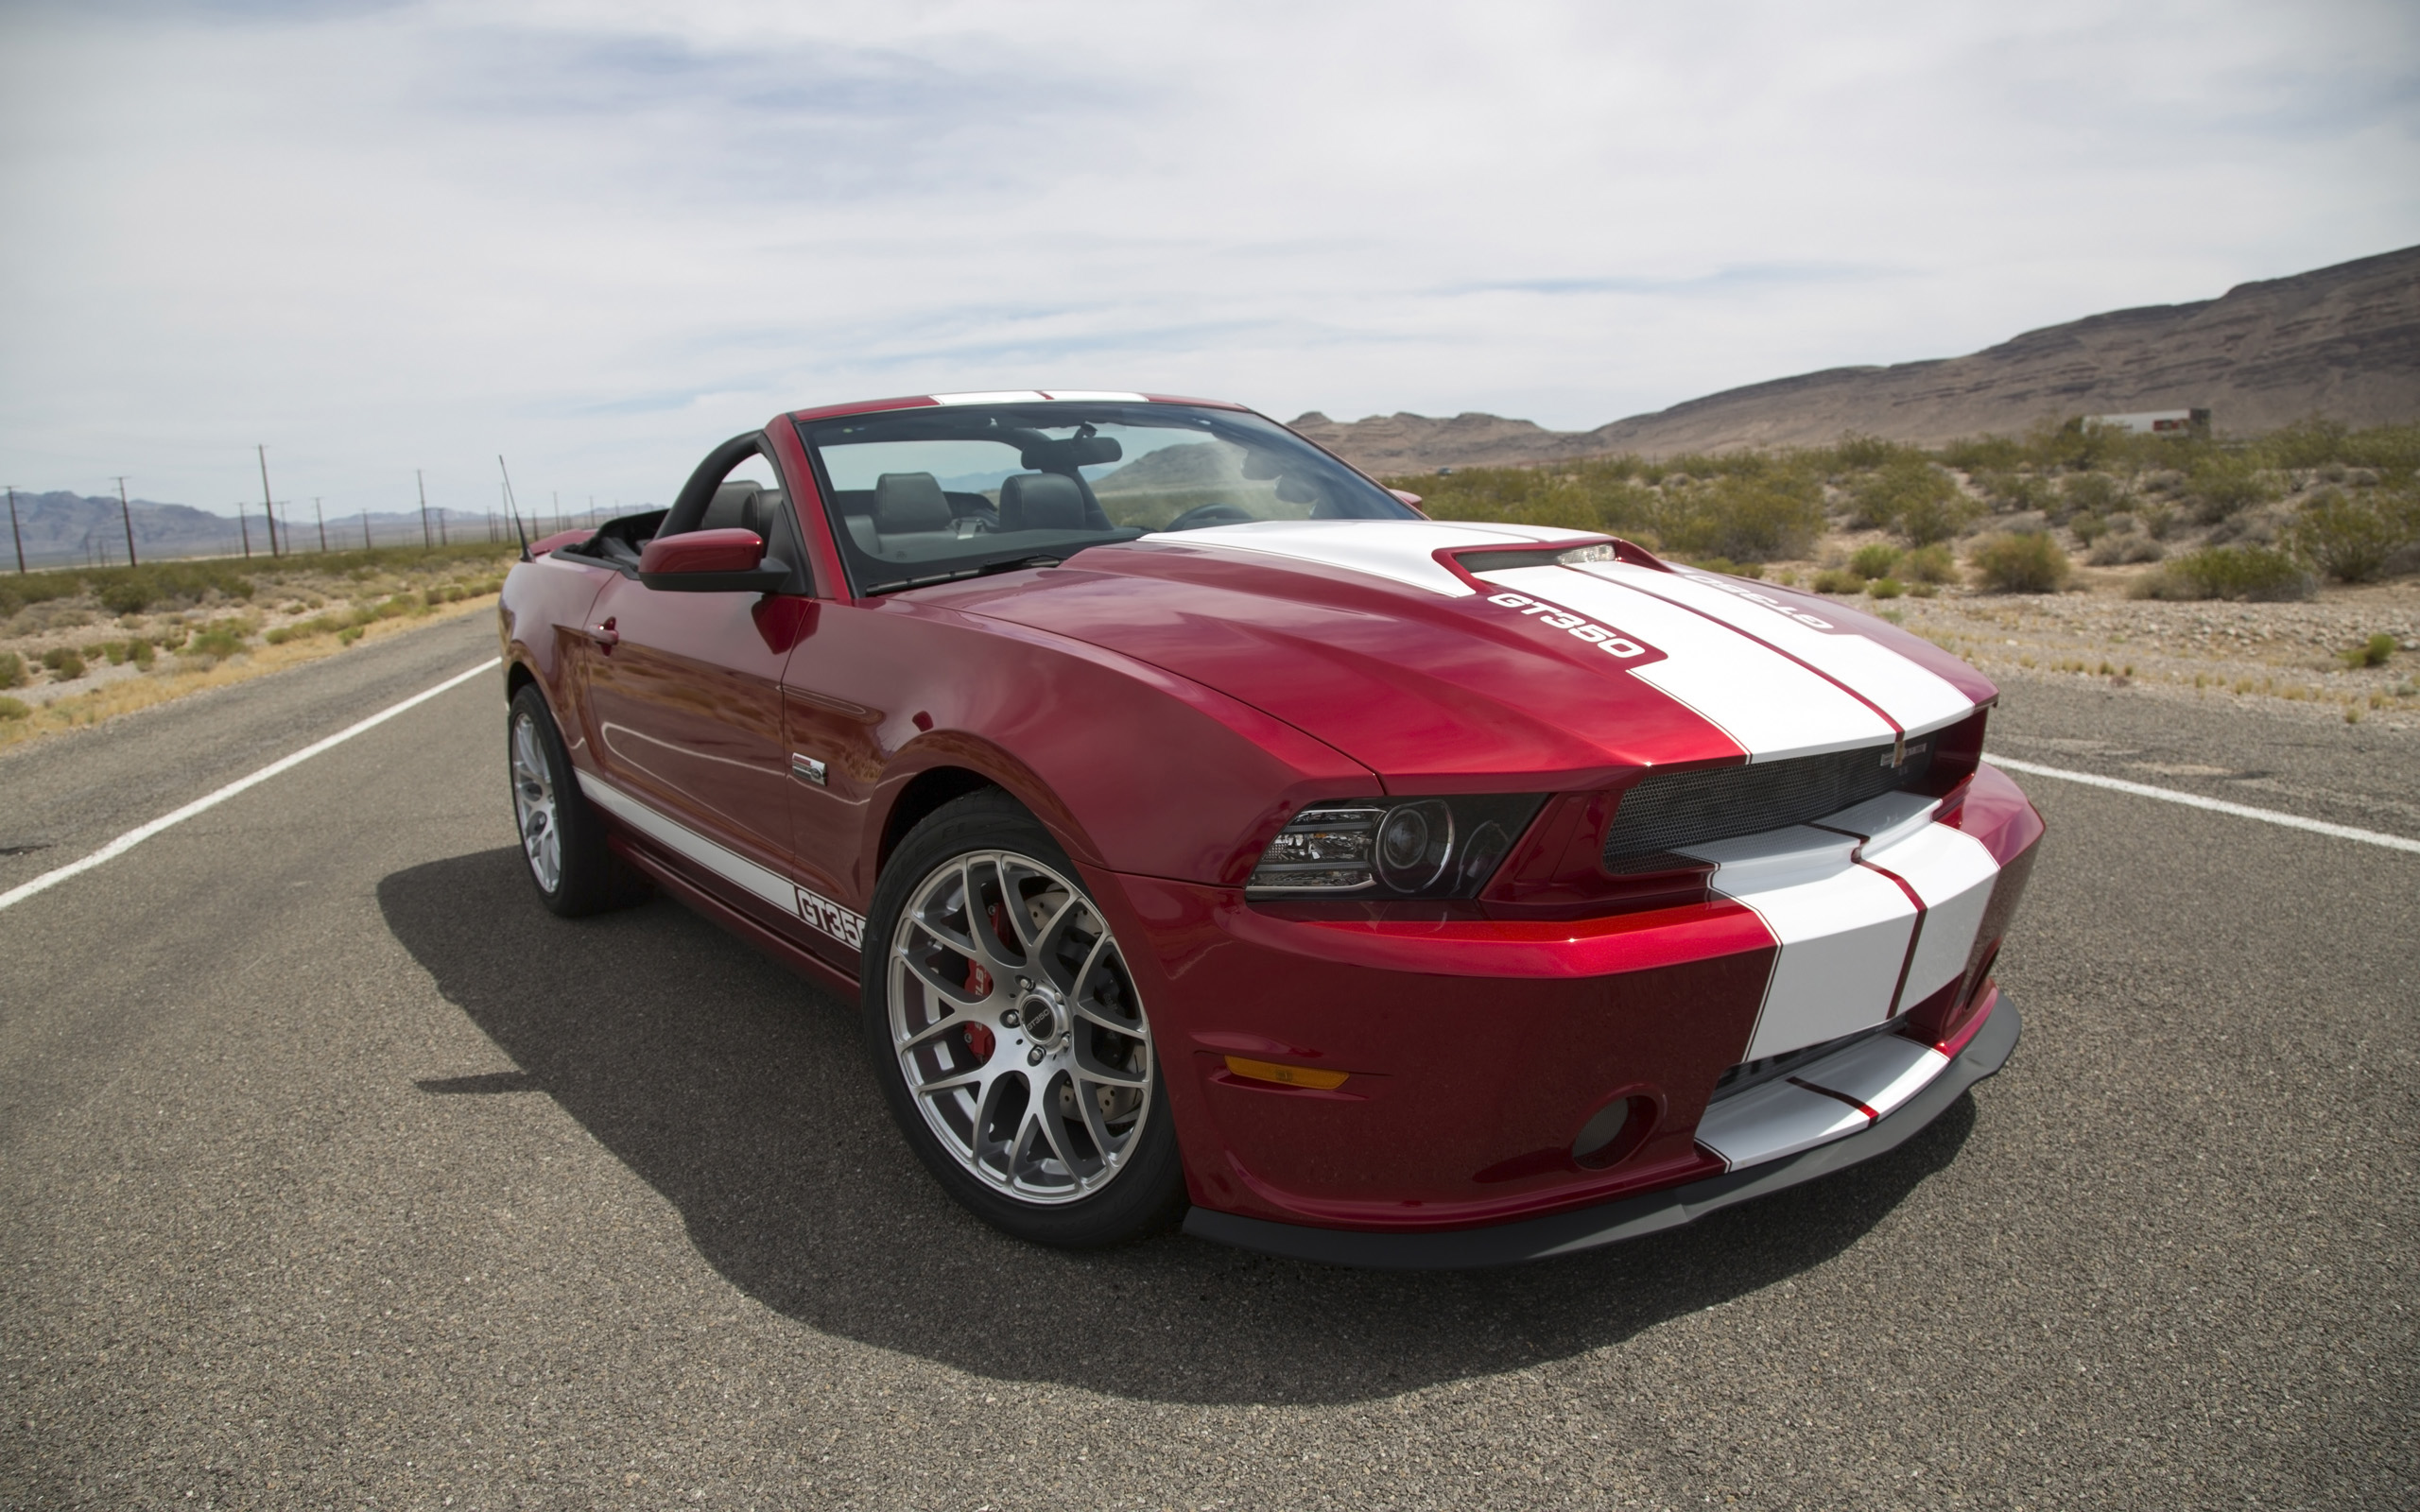 2013, Shelby, Gt350, Ford, Mustang, Supercar, Musle, Ga Wallpaper